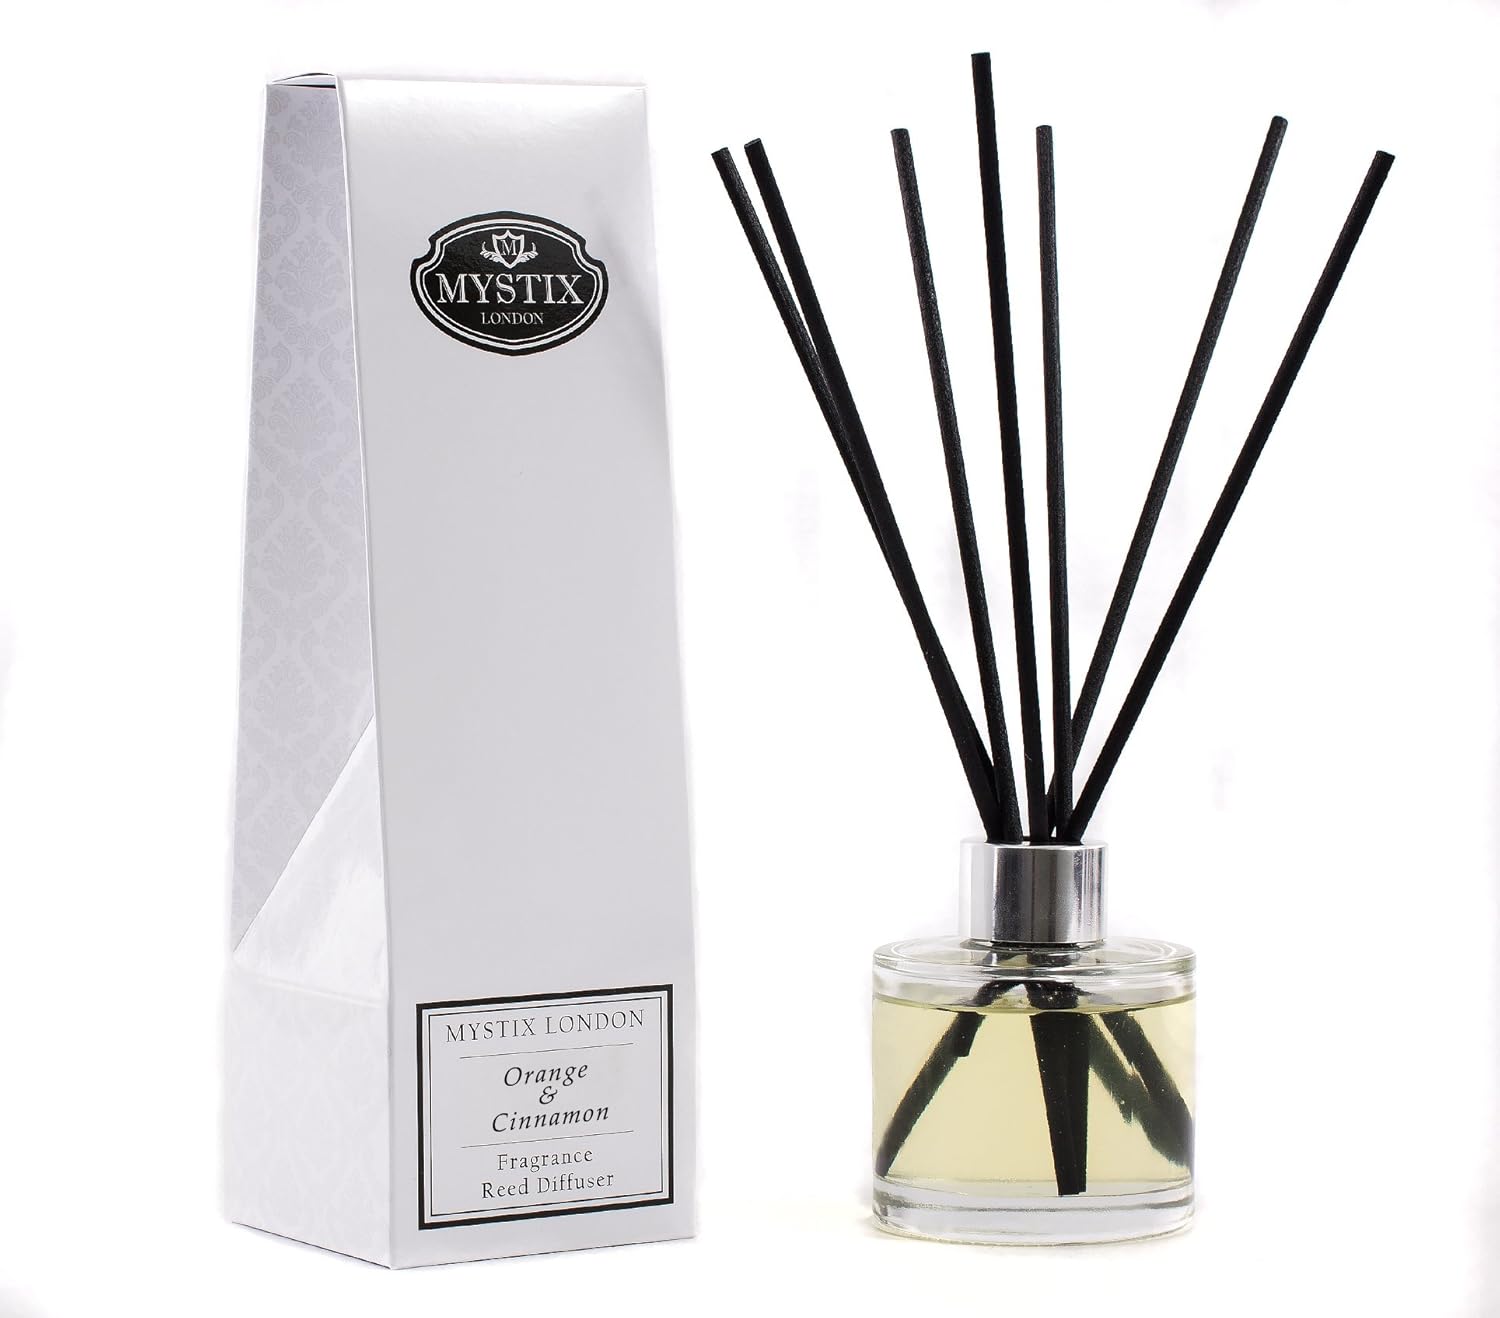 Mystix London | Orange & Cinnamon Fragrance Oil Reed Diffuser | 120ml | Best Aroma for Home, Kitchen, Living Room and Bathroom | Perfect as a Gift | Refillable